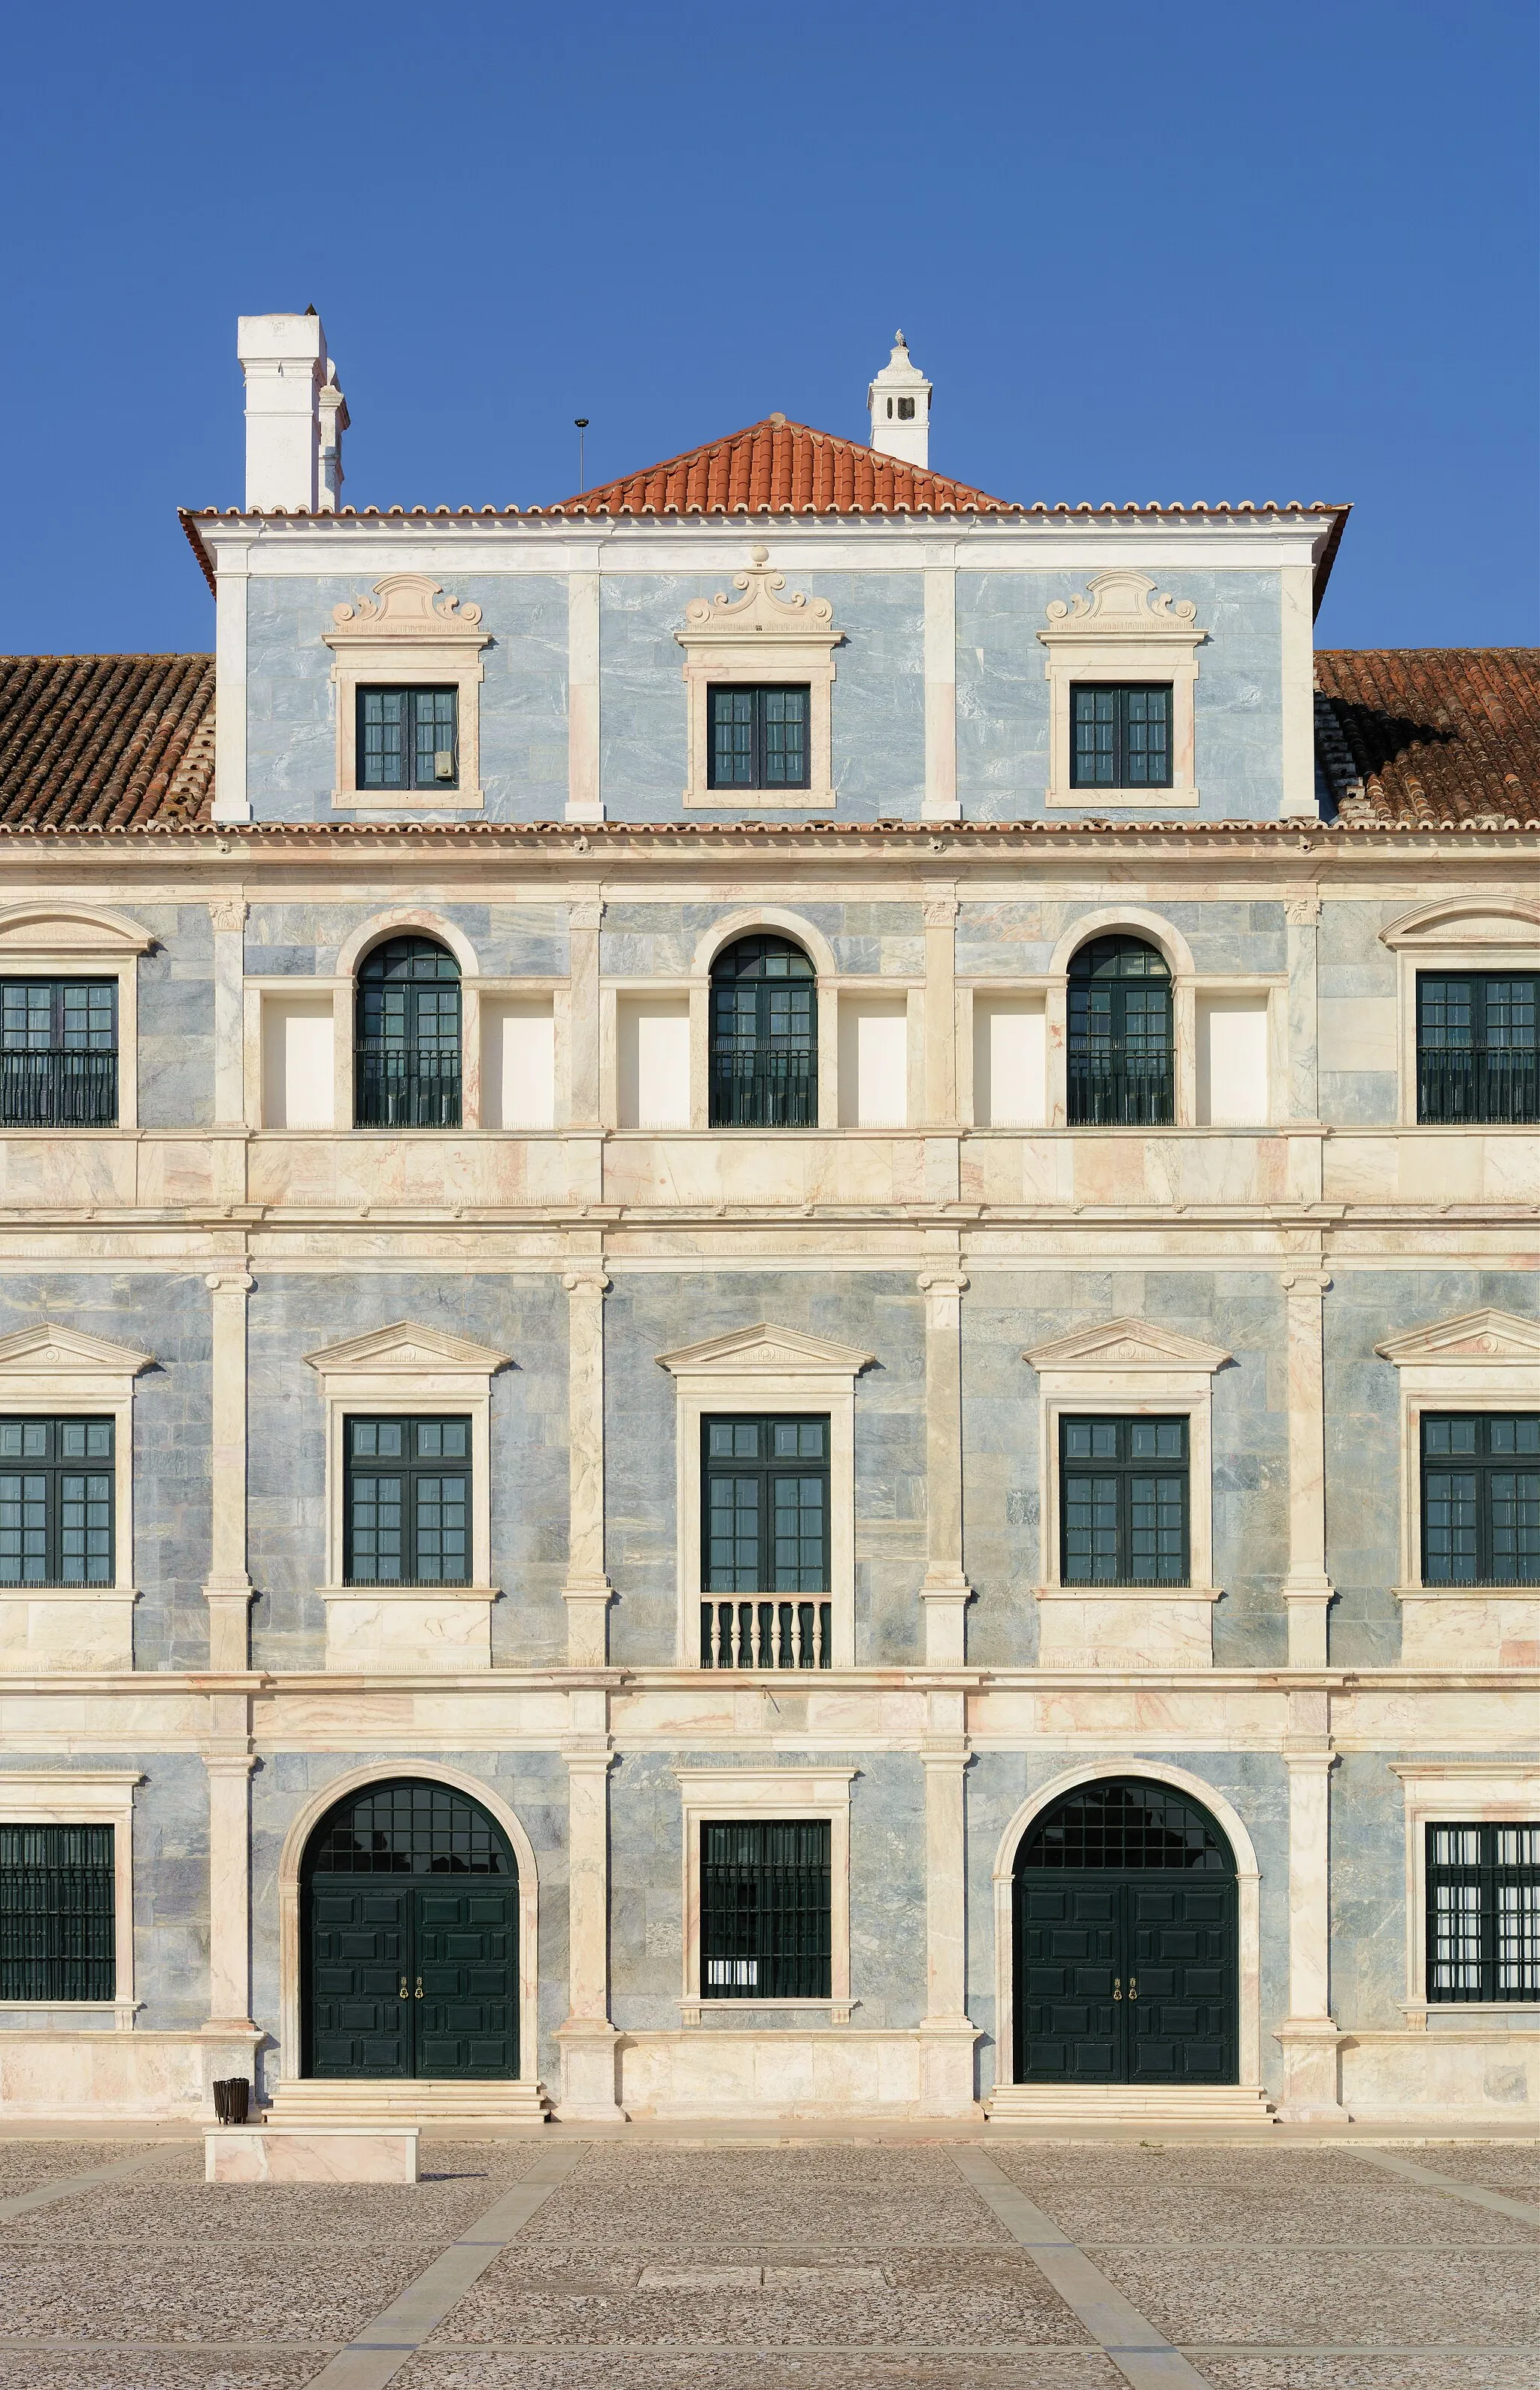 Photo showing: Main facade of the Ducal Palace of Vila Viçosa, Portugal. The outside walls are covered with marbles from the region.